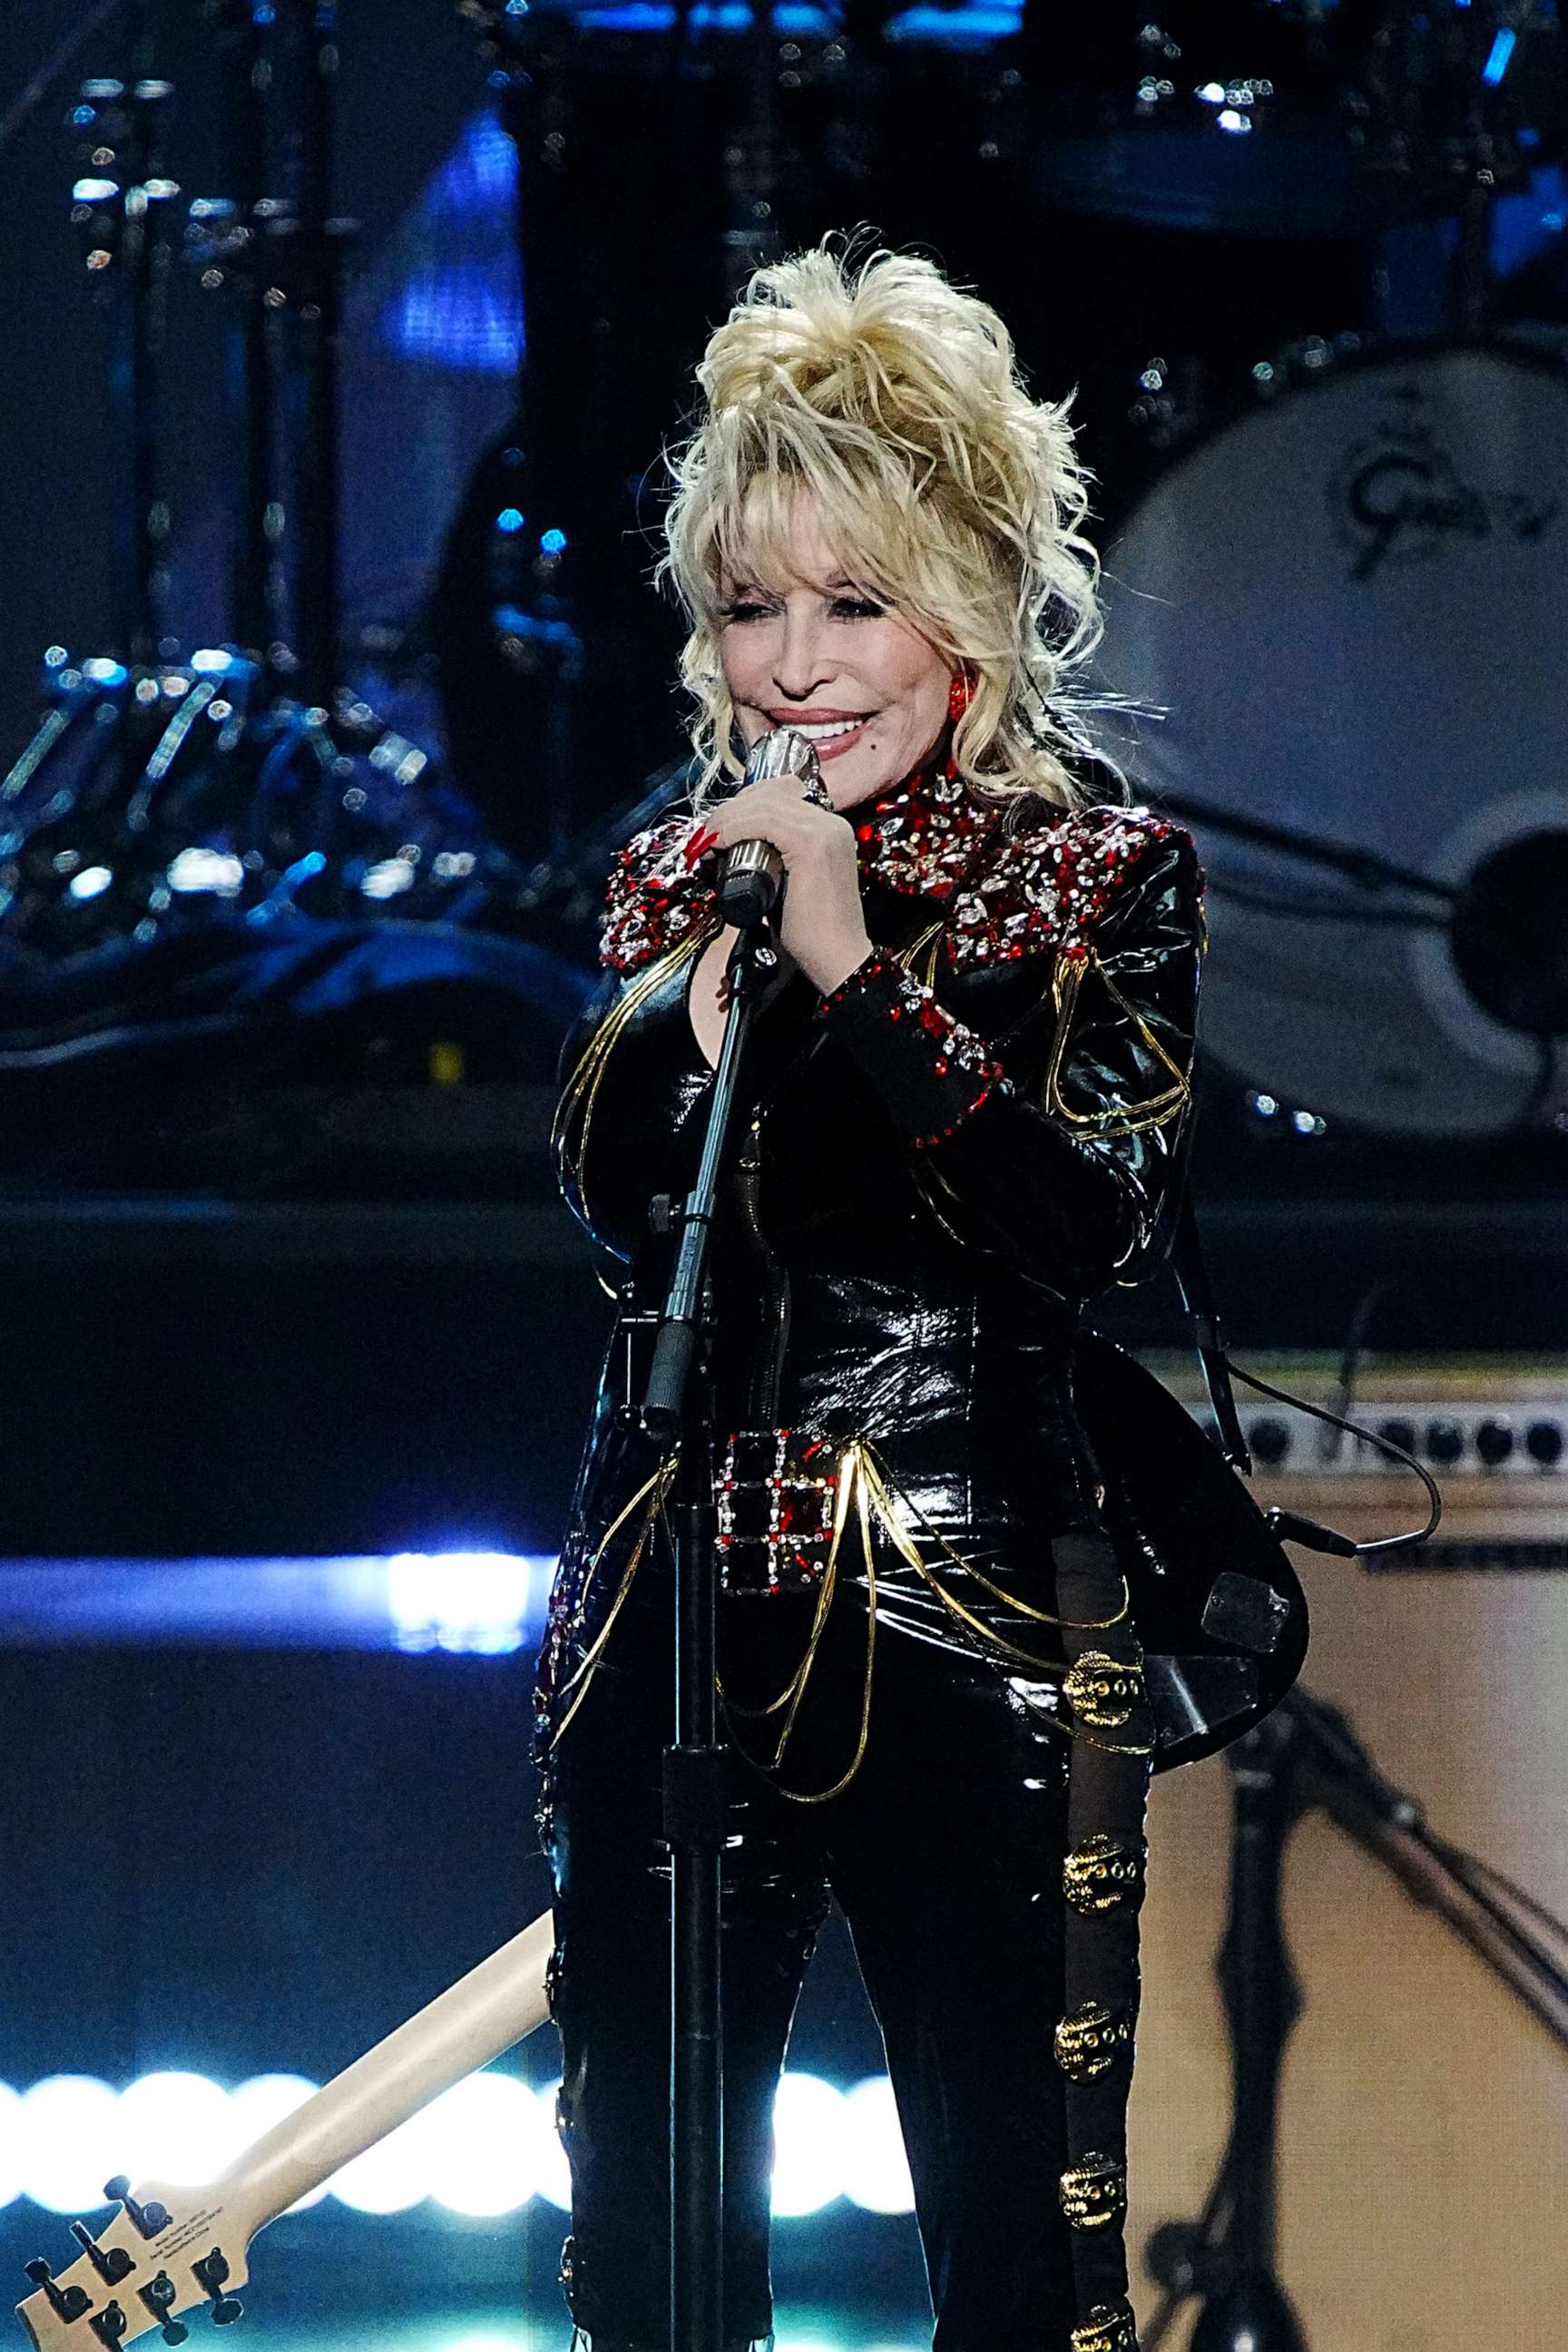 PHOTO: In this Nov. 5, 2022, file photo, Dolly Parton performs on stage during the 37th Annual Rock & Roll Hall Of Fame Induction Ceremony at Microsoft Theater in Los Angeles.